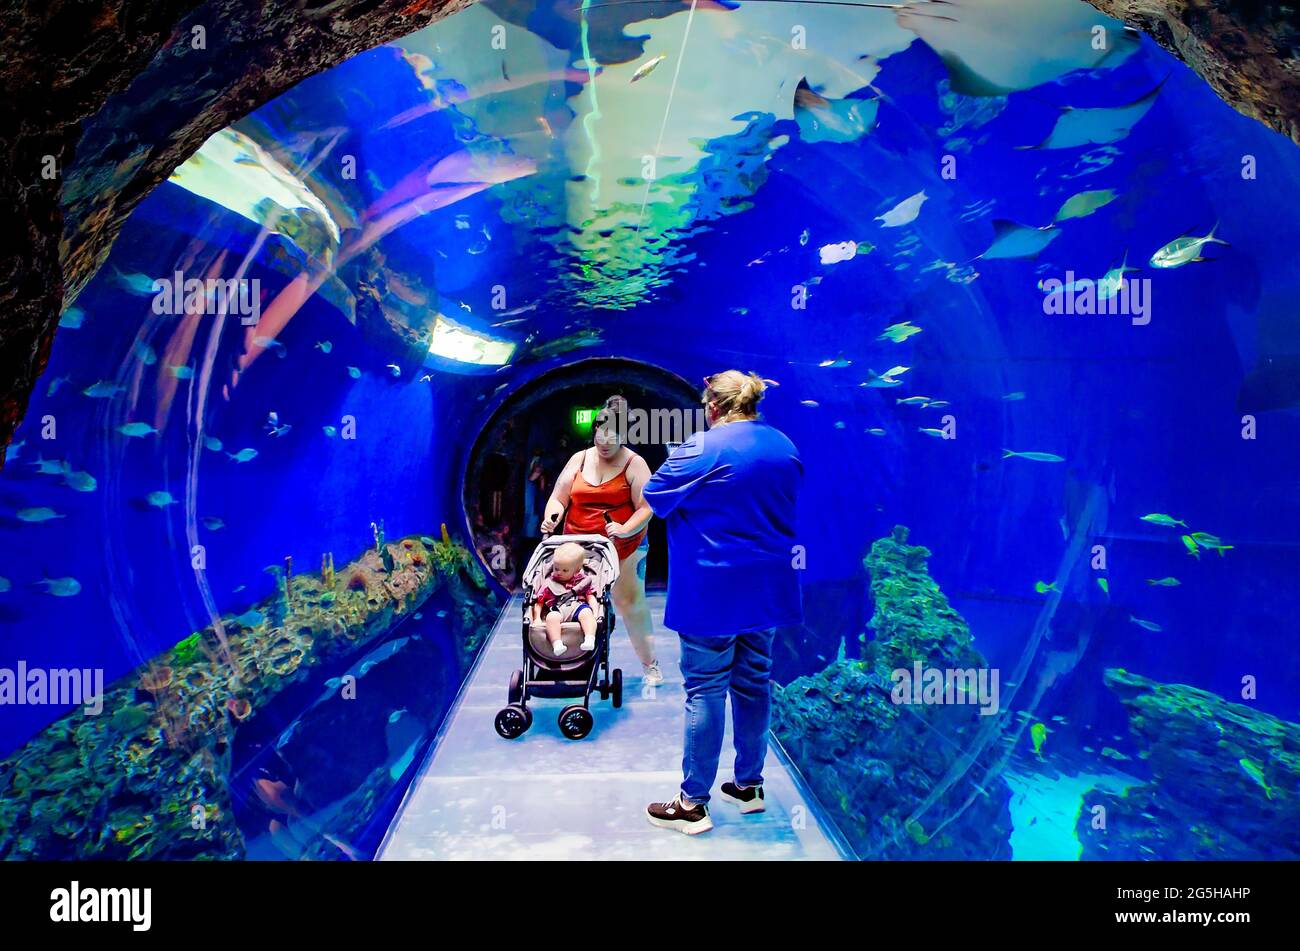 A tunnel aquarium gives visitors an immersive experience at Mississippi Aquarium, June 24, 2021, in Gulfport, Mississippi. Stock Photo